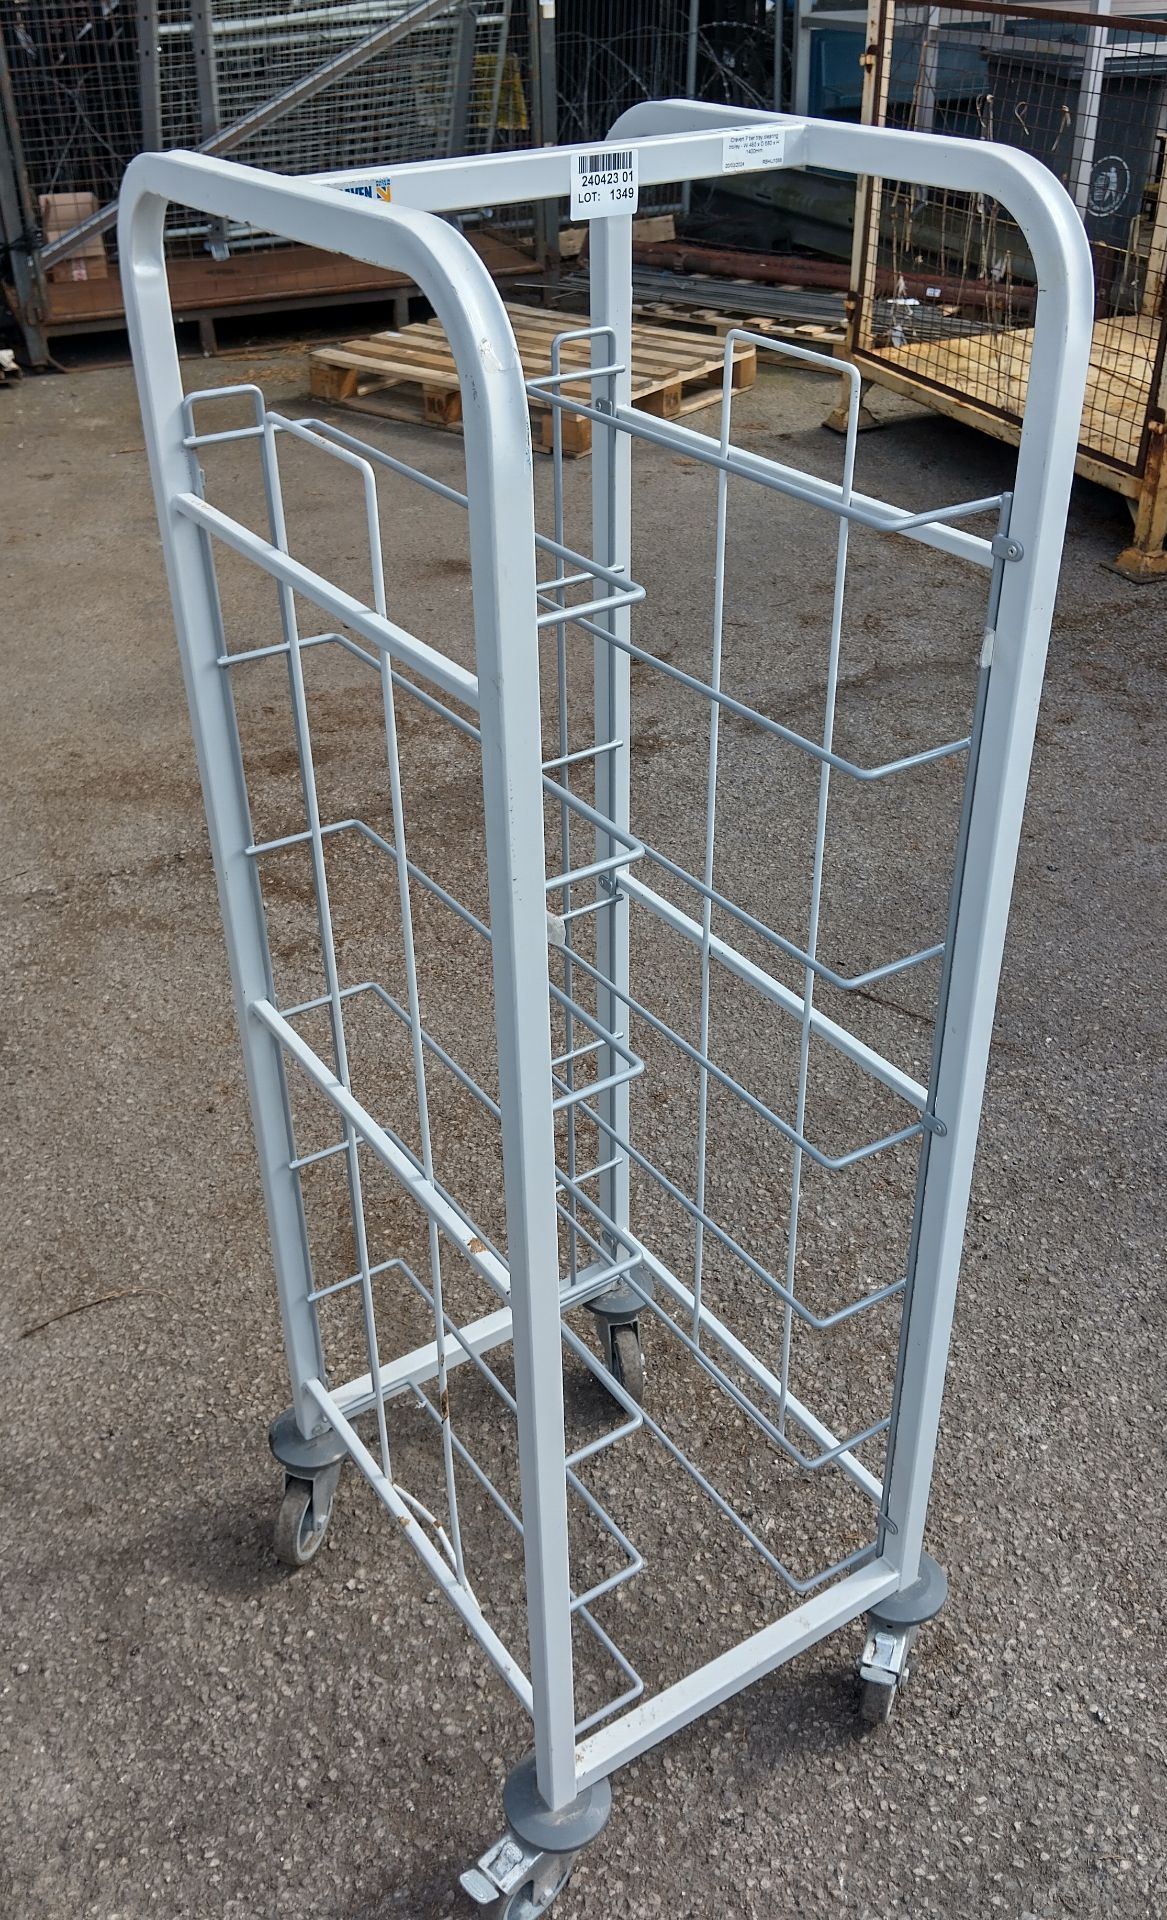 Craven 7 tier tray clearing trolley - W 480 x D 580 x H 1400mm - Image 2 of 2